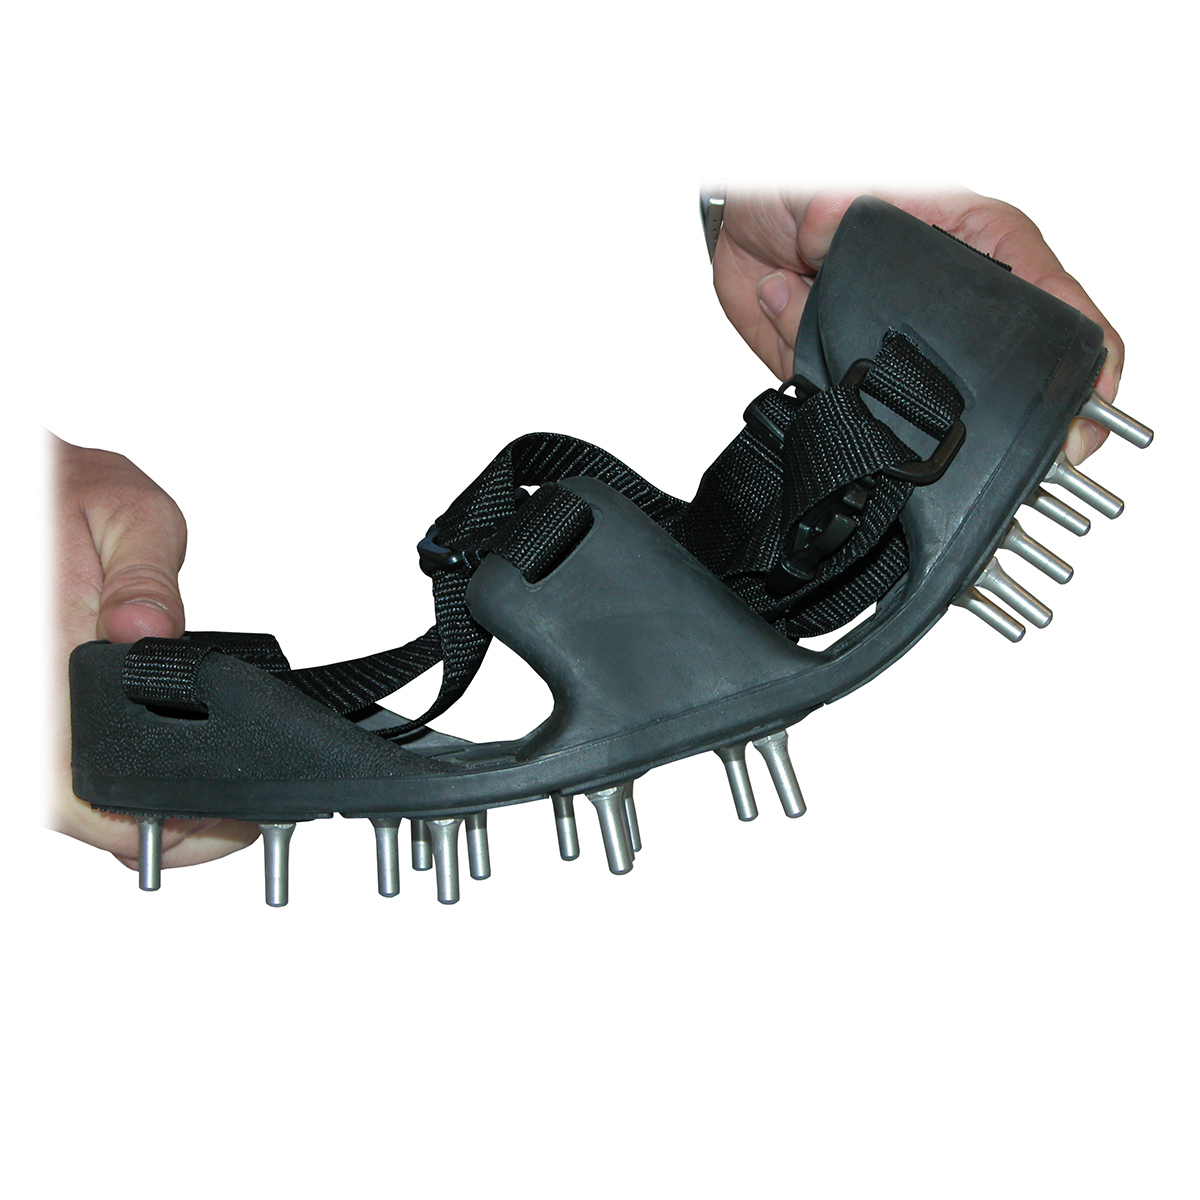 Flexible Bed Spiked Shoes with 7/8 Rounded Tip Spikes - L (Shoe Size 10 -  11-1/2)